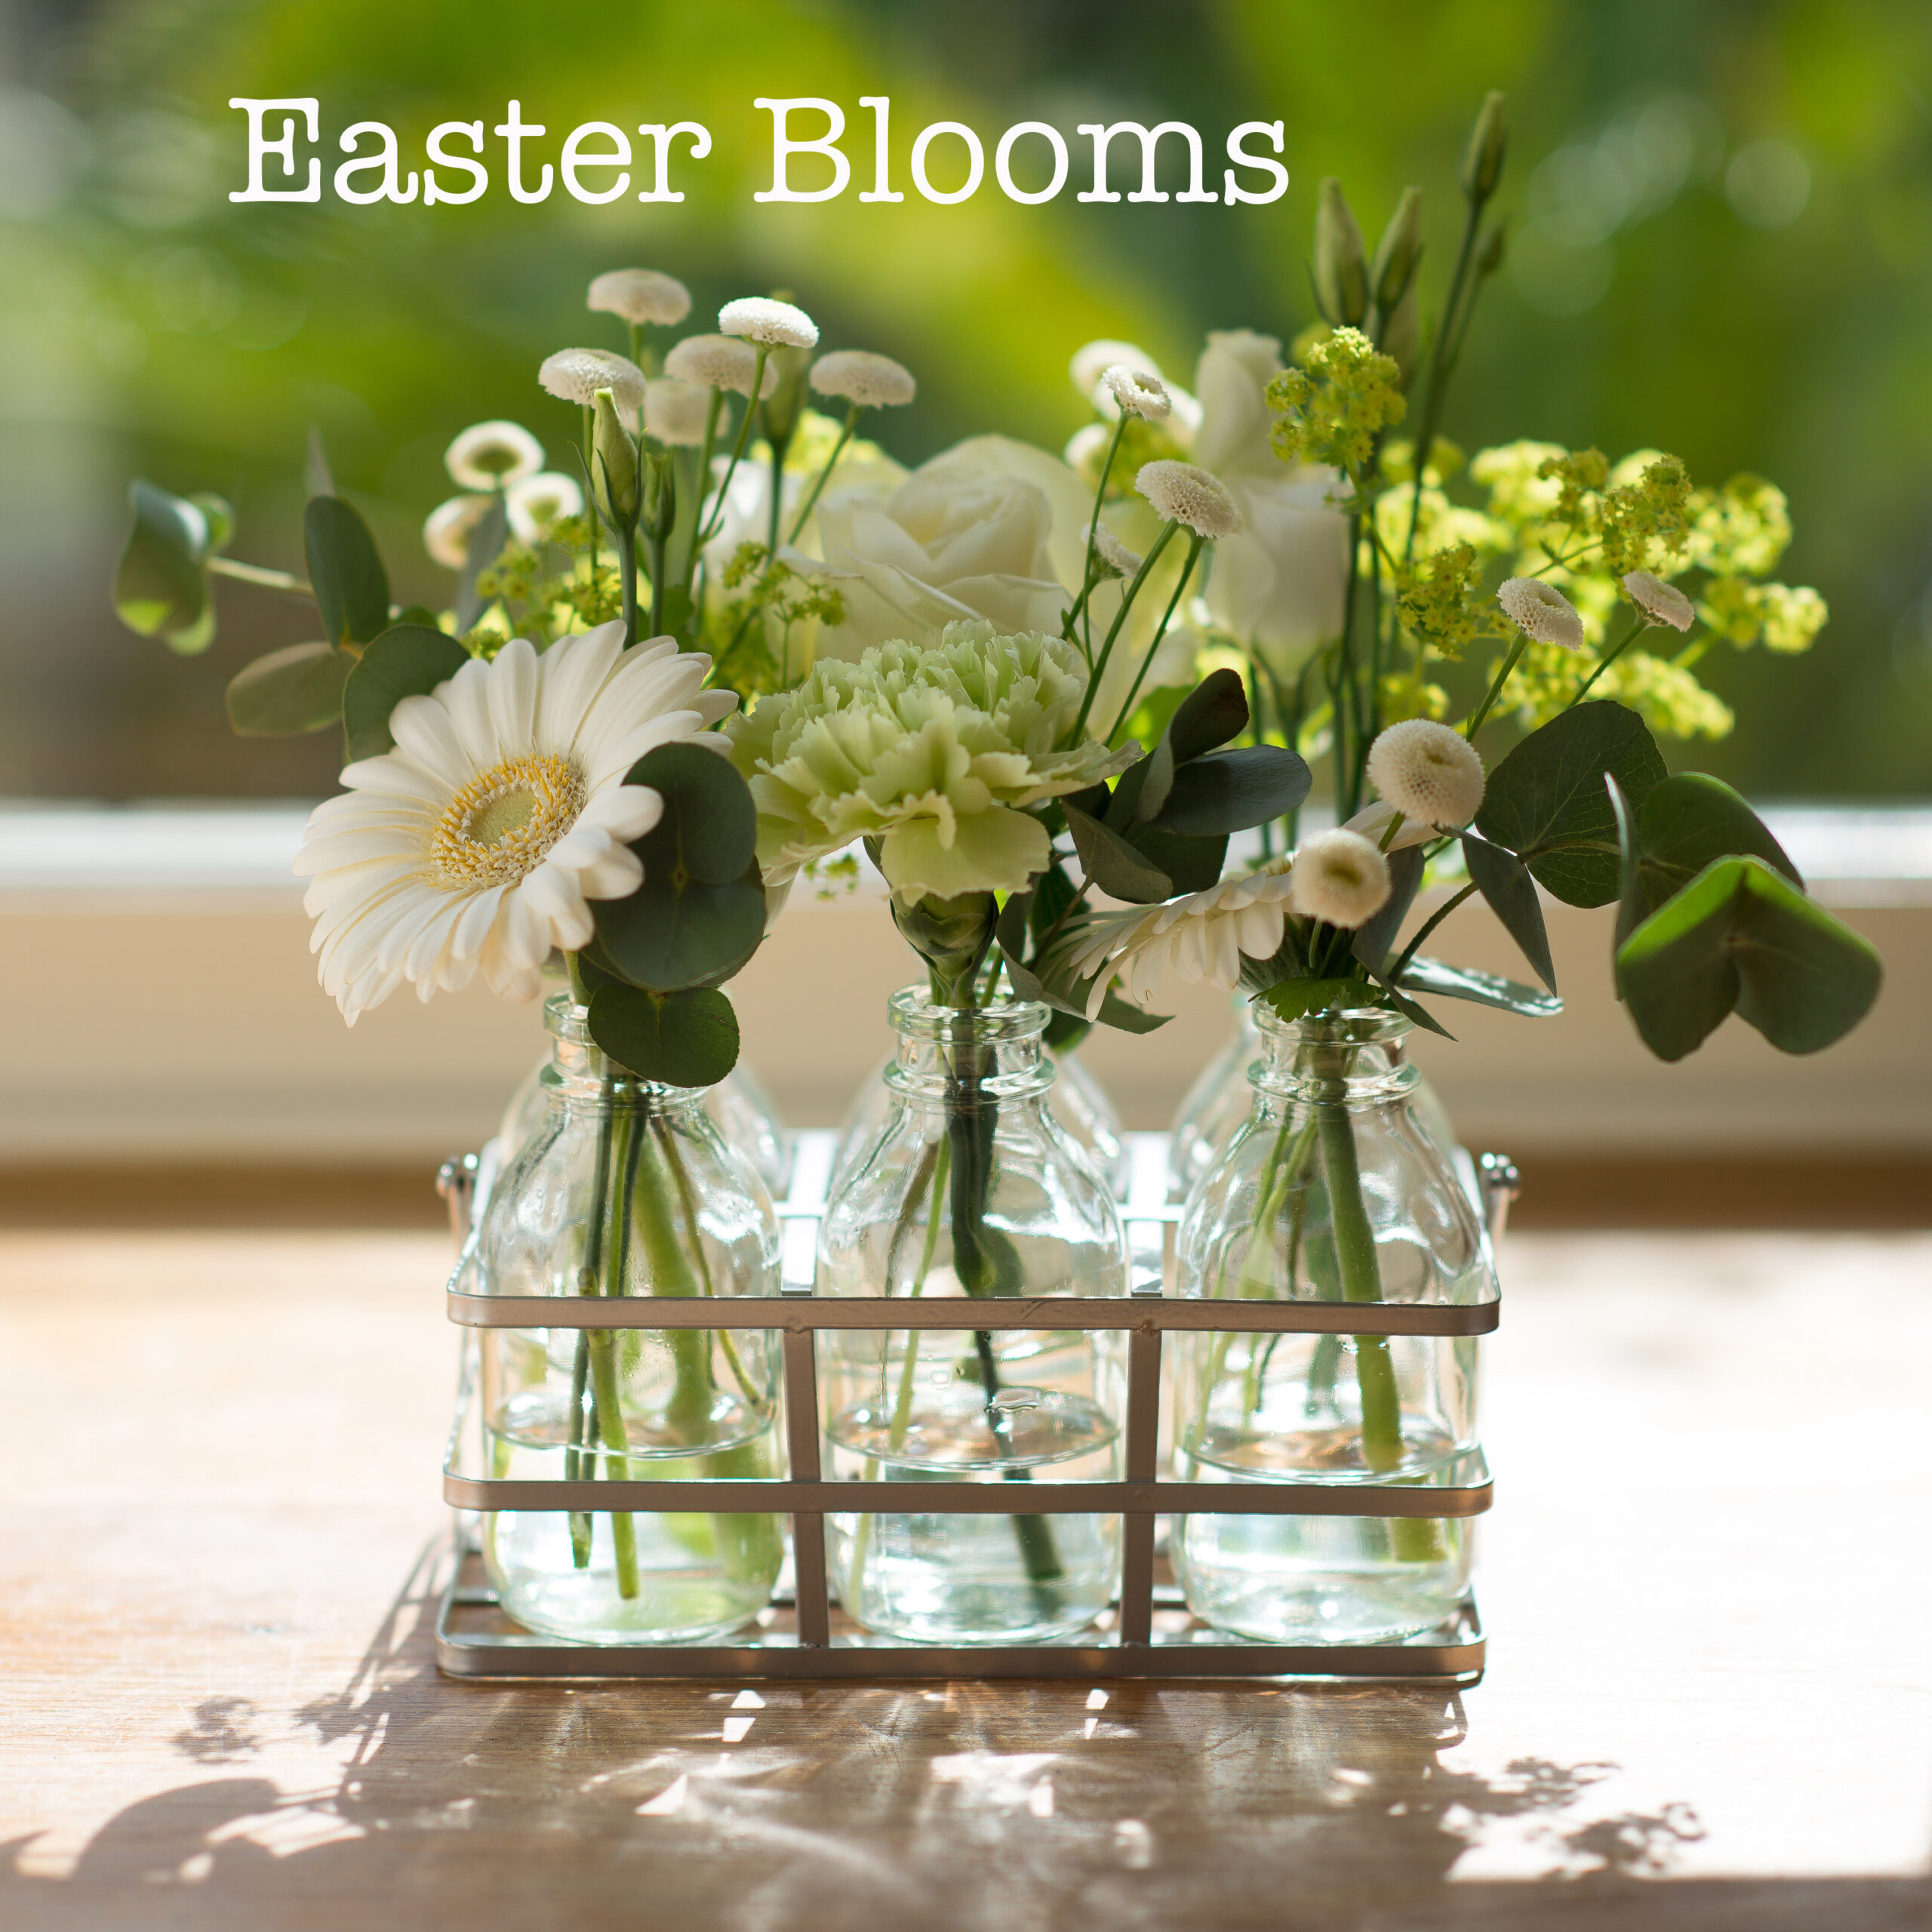 Easter Blooms